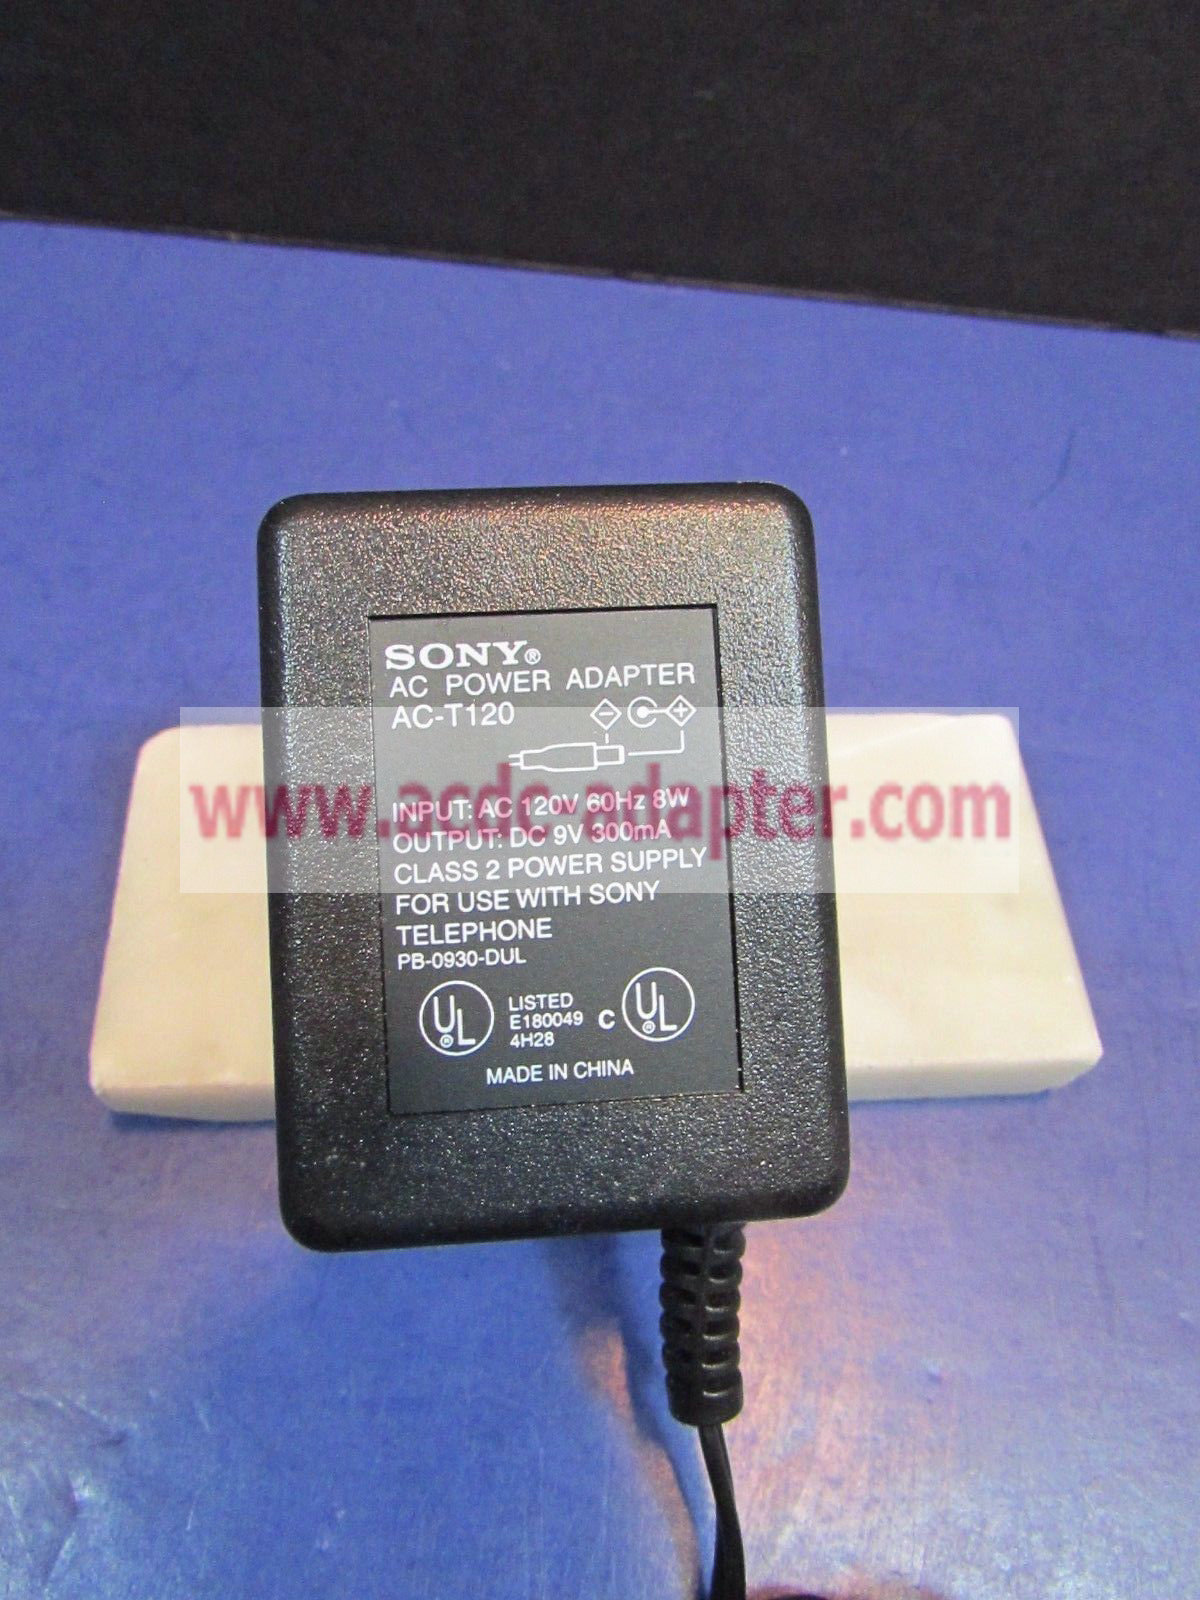 New Sony Ac-T120 Ac Power Adapter 9V DC 300mA FOR SONY TELEPHONE